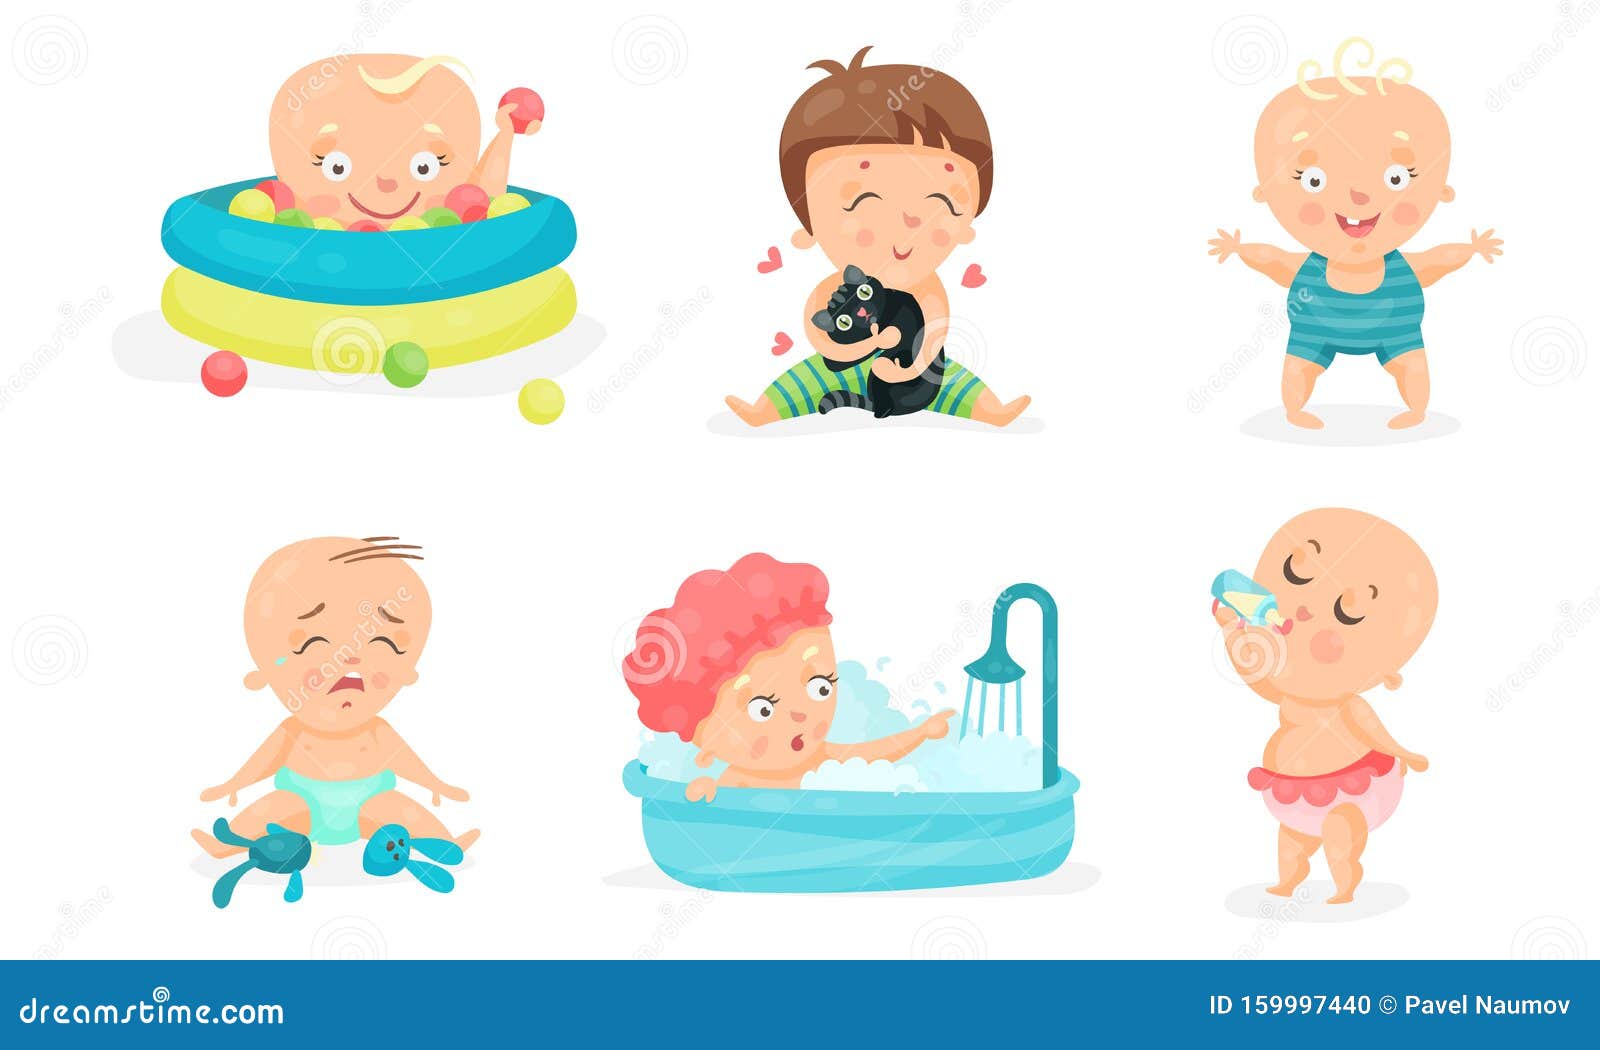 Set of Vector Illustrations with Baby Toddlers in Different Children ...